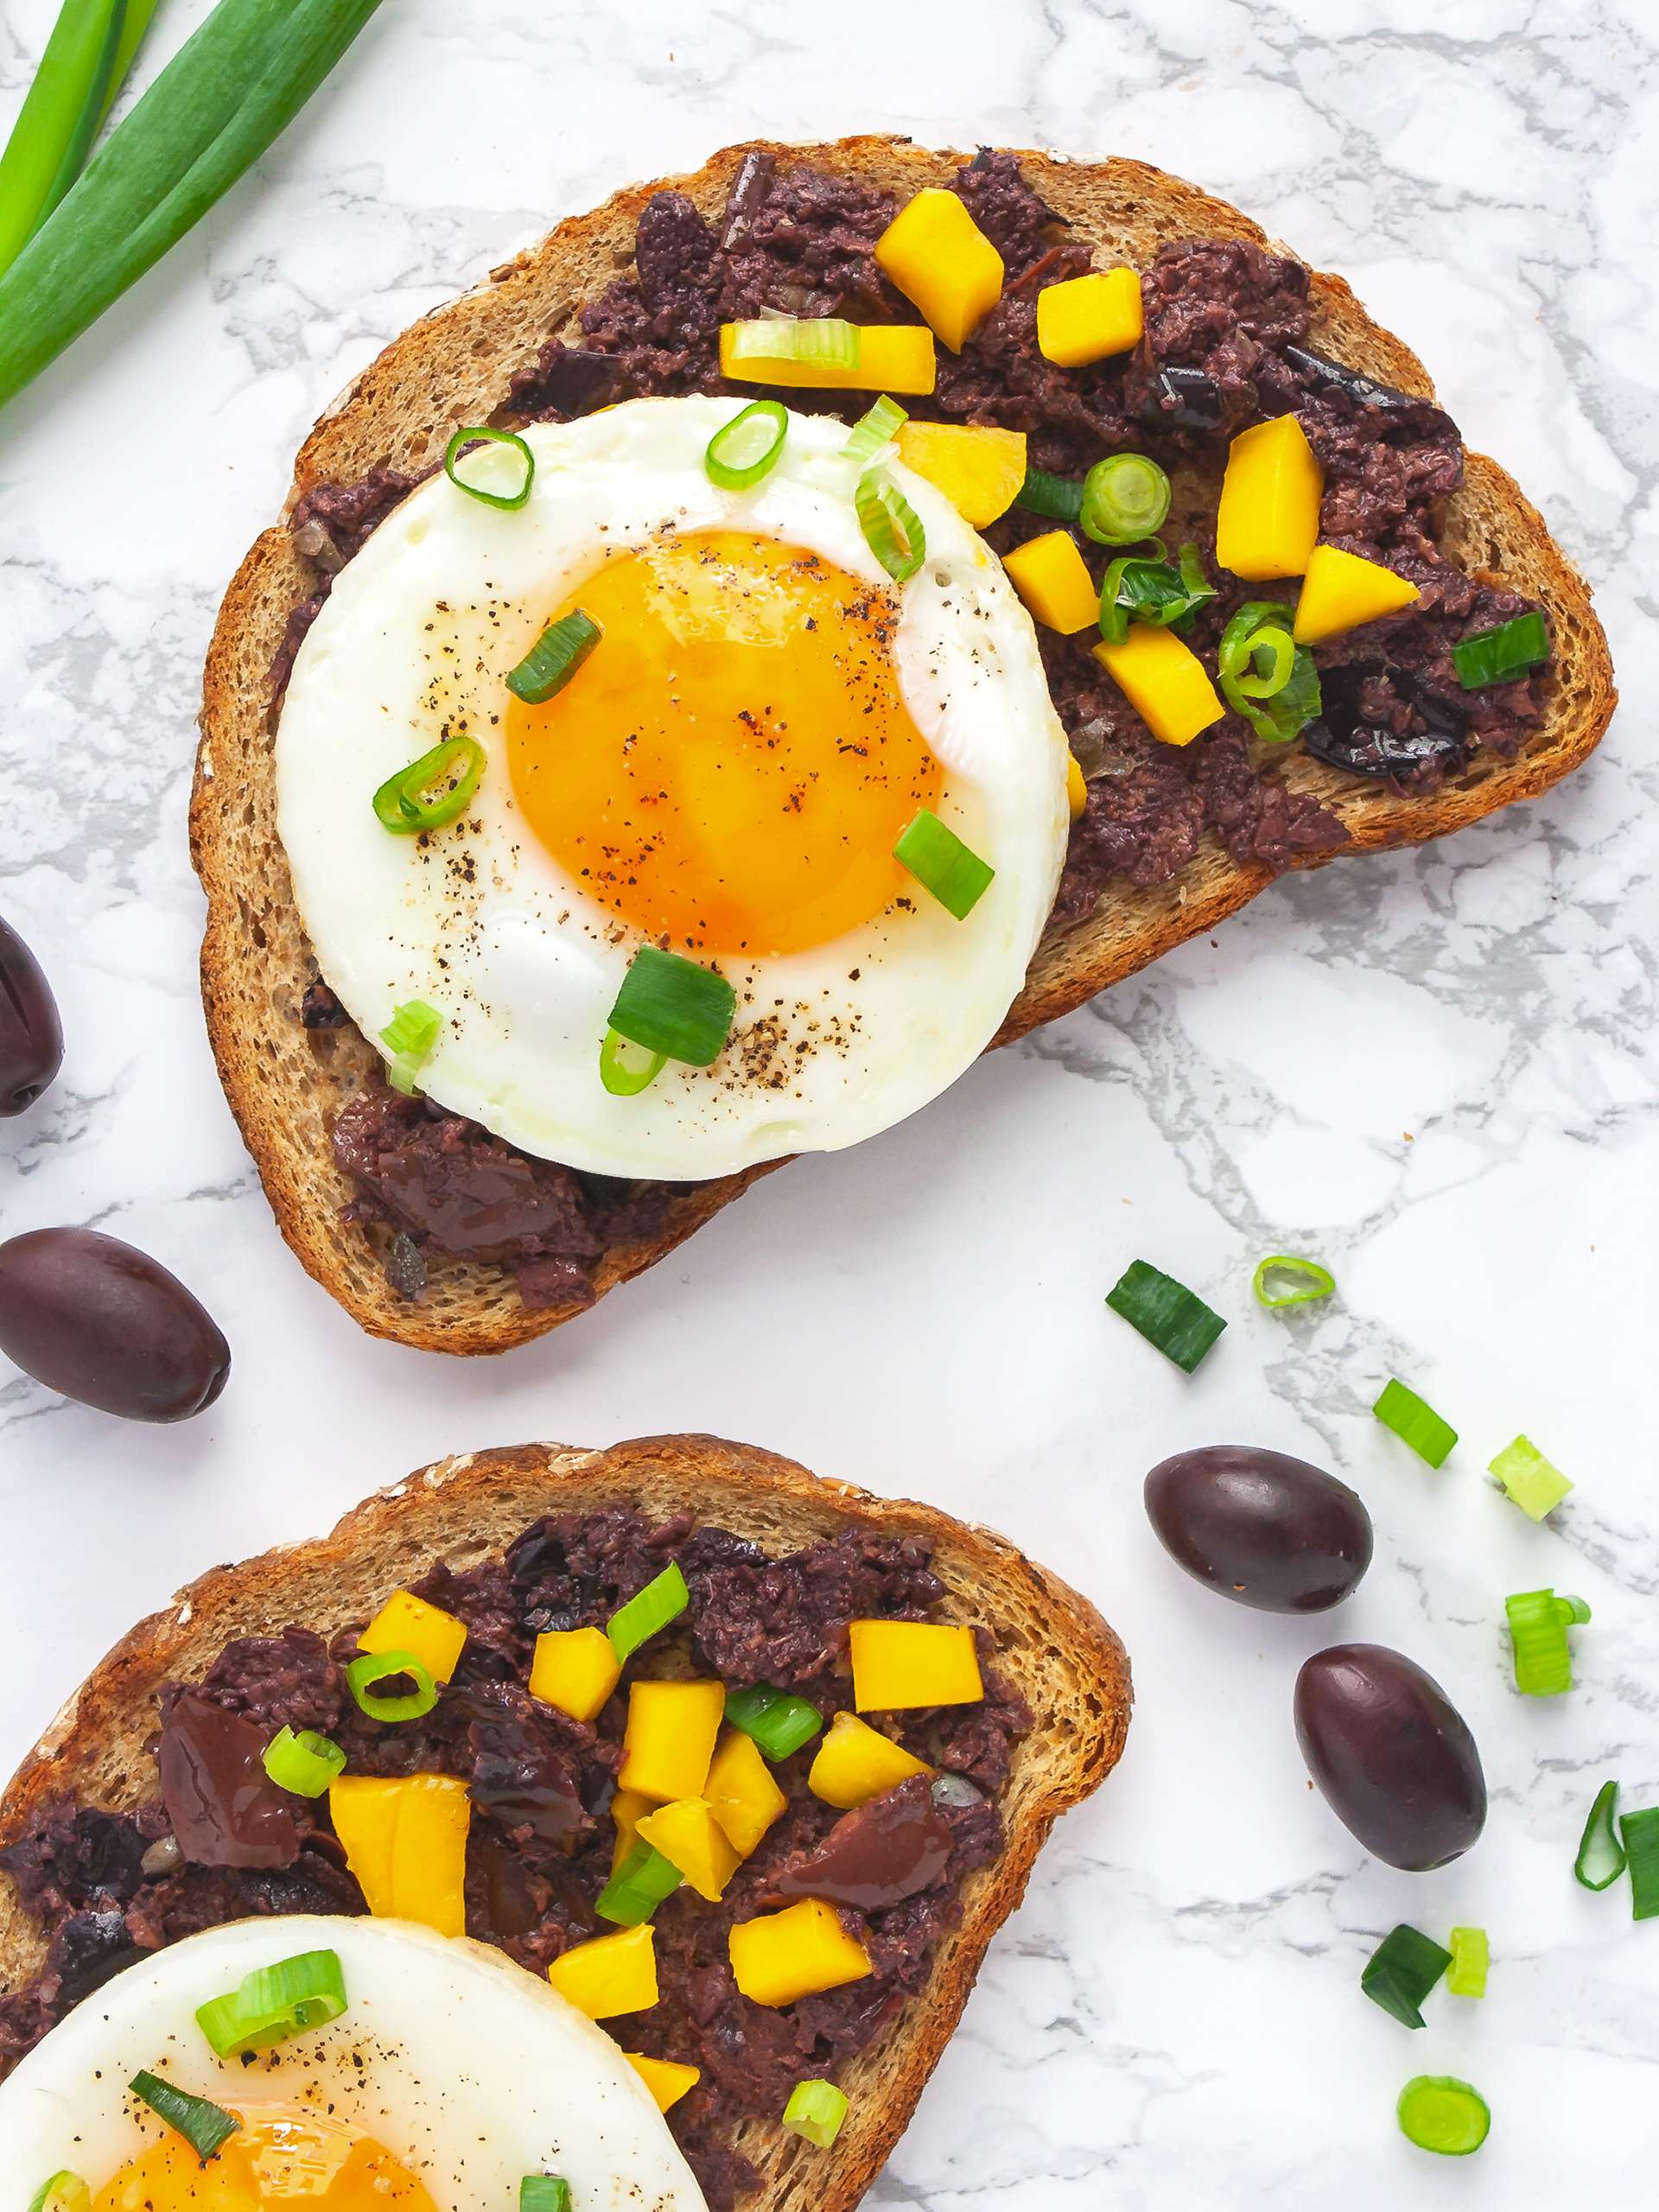 Olive Tapenade Bruschetta With Mango and Eggs